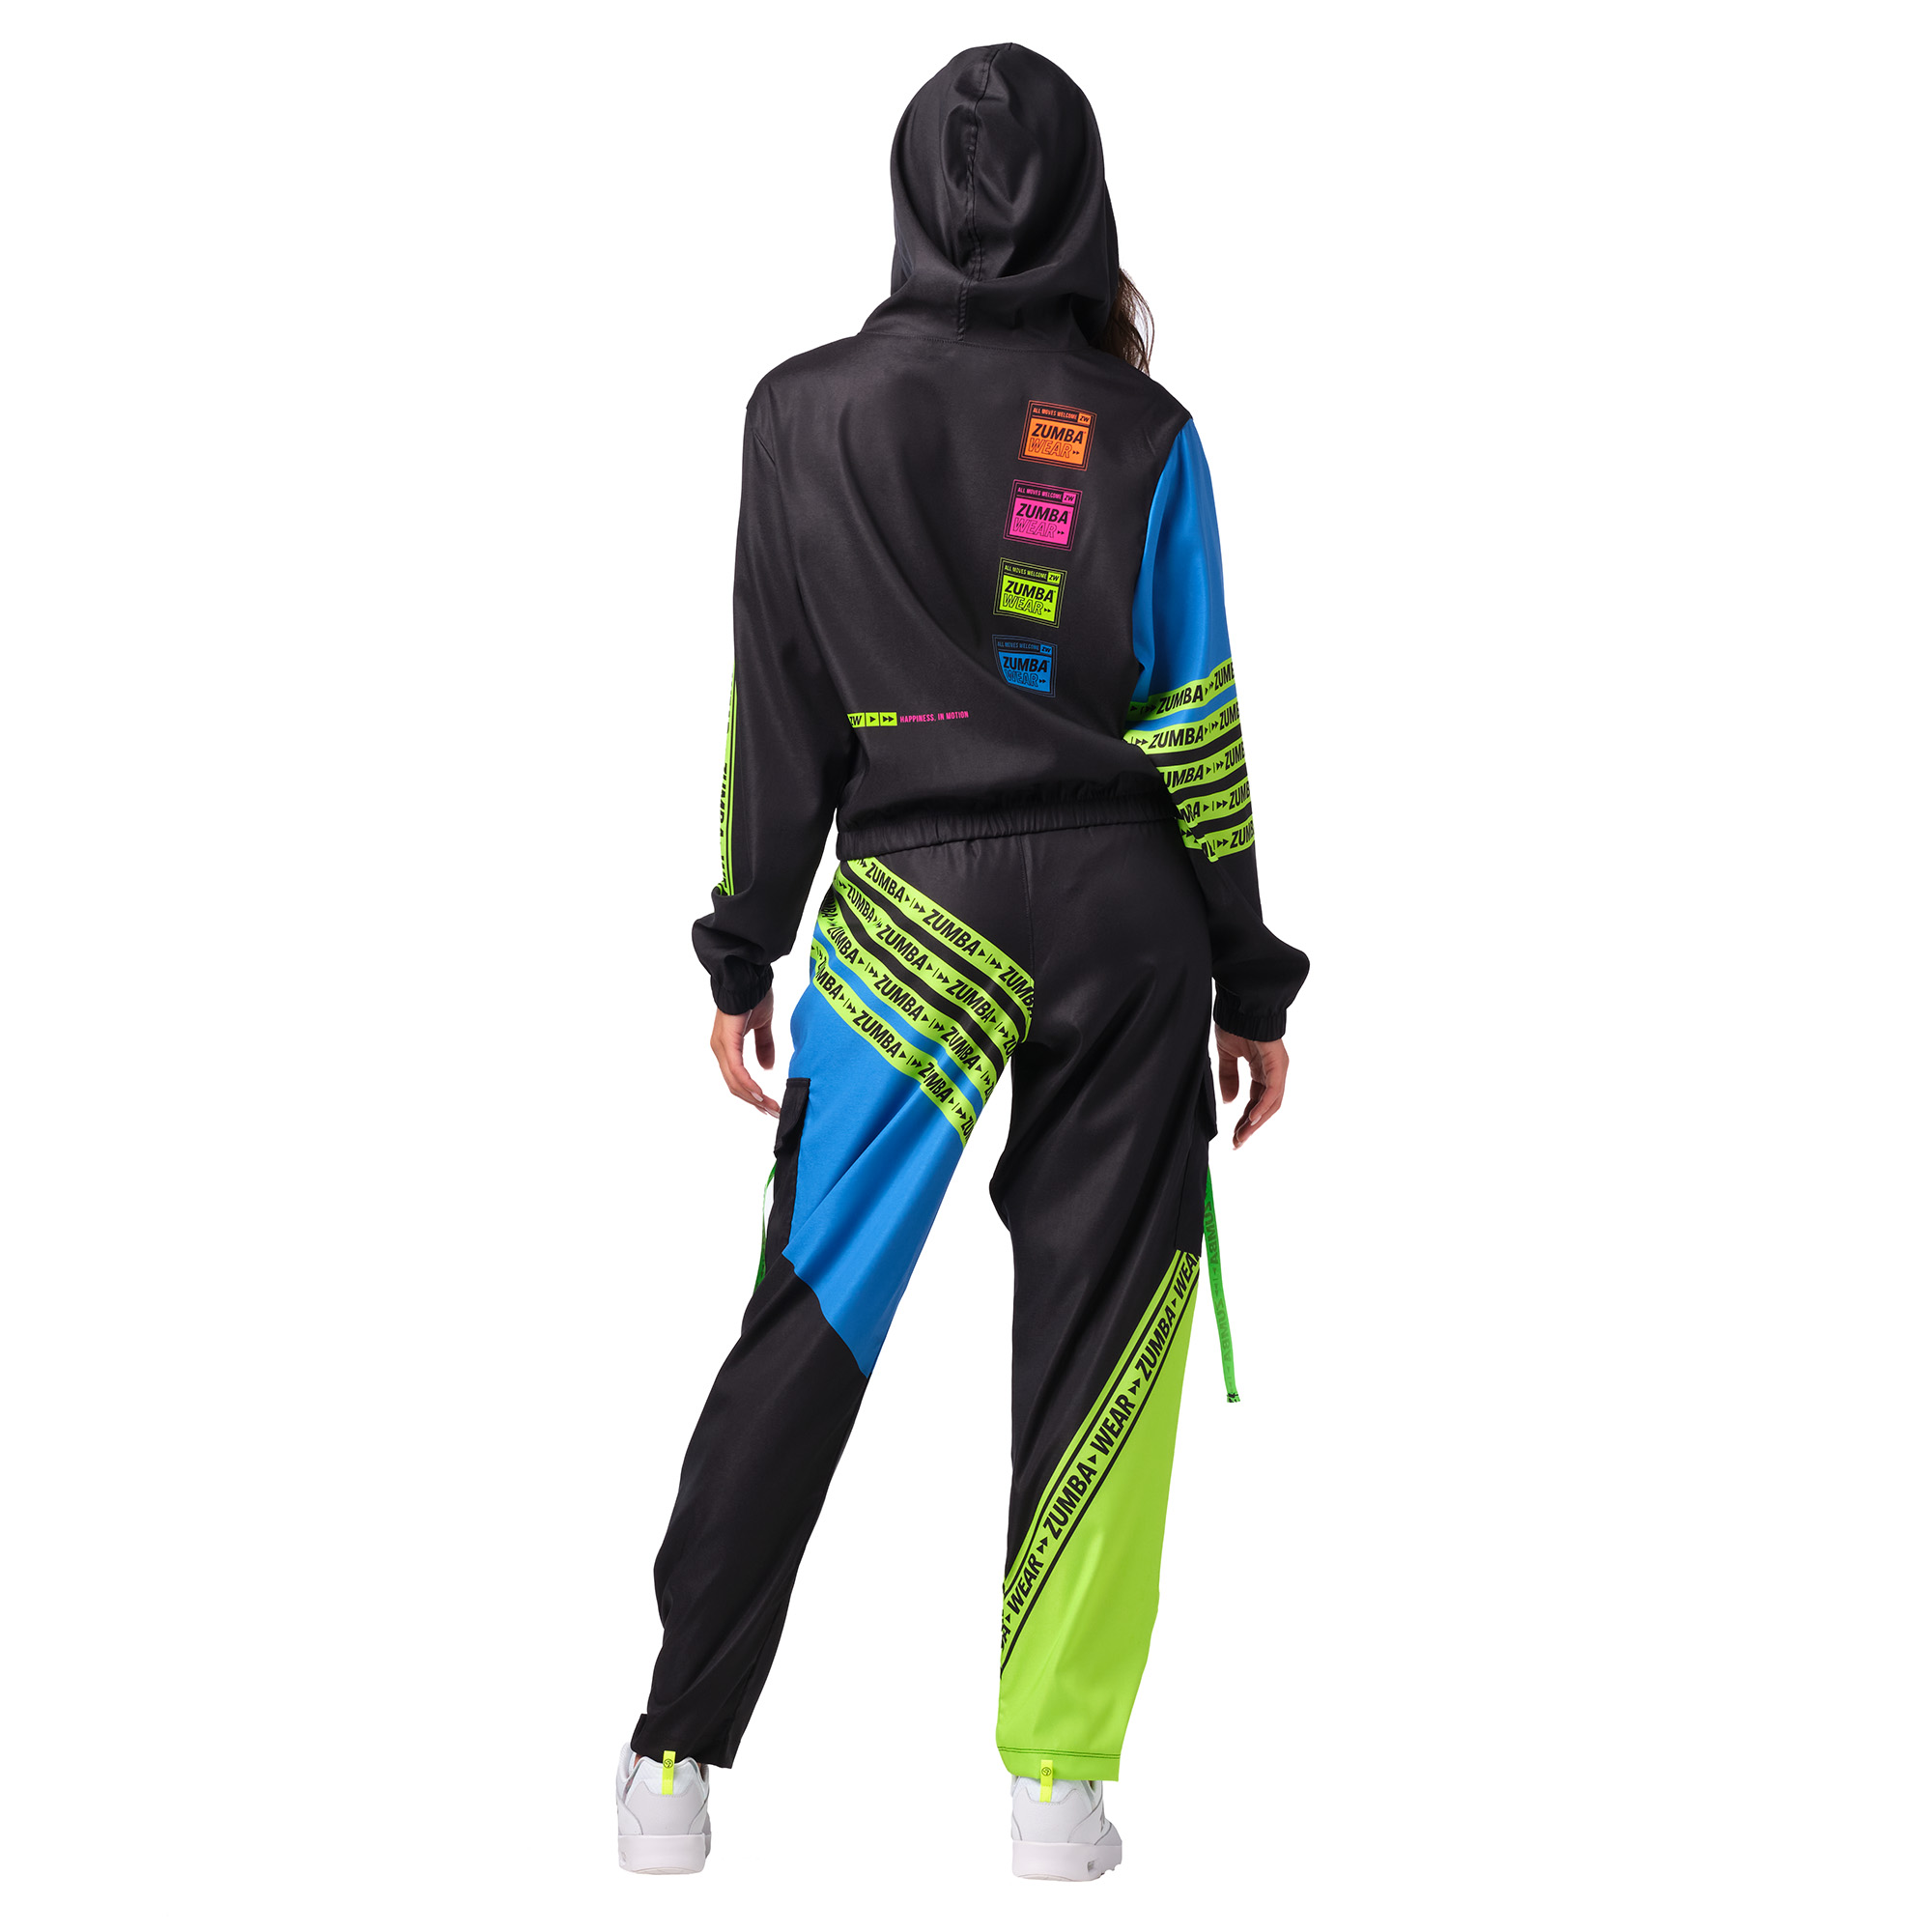 Shop ZUMBA Unisex Street Style Neon Color Activewear Bottoms by  Happy-Newyork51